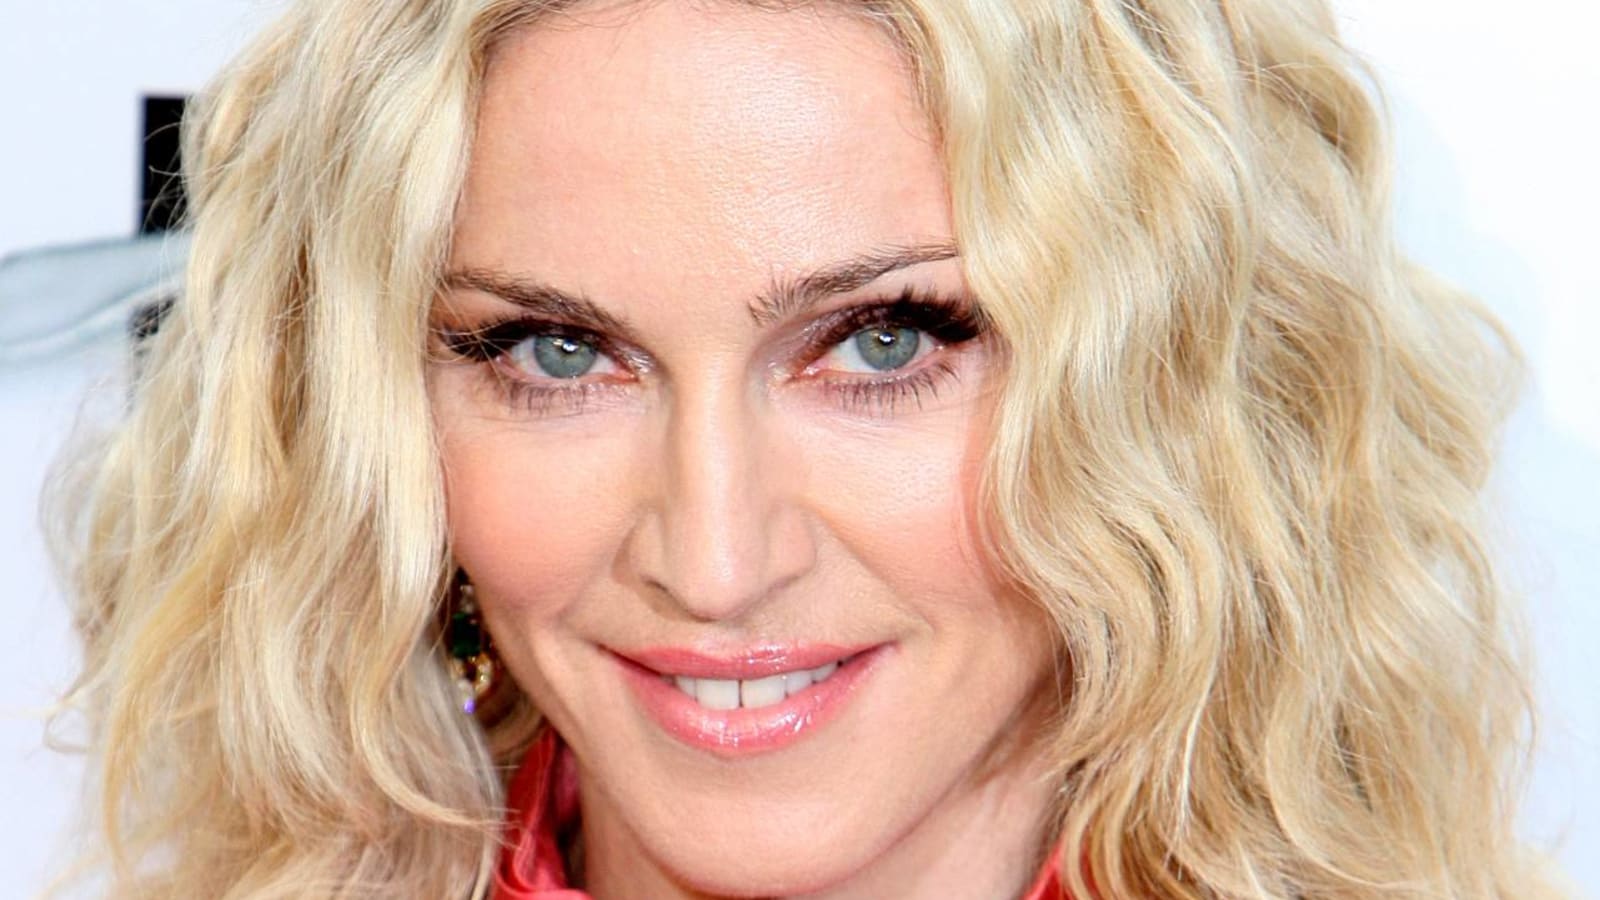 Madonna's 'Tonight Show' appearance included one flashing and several revelations